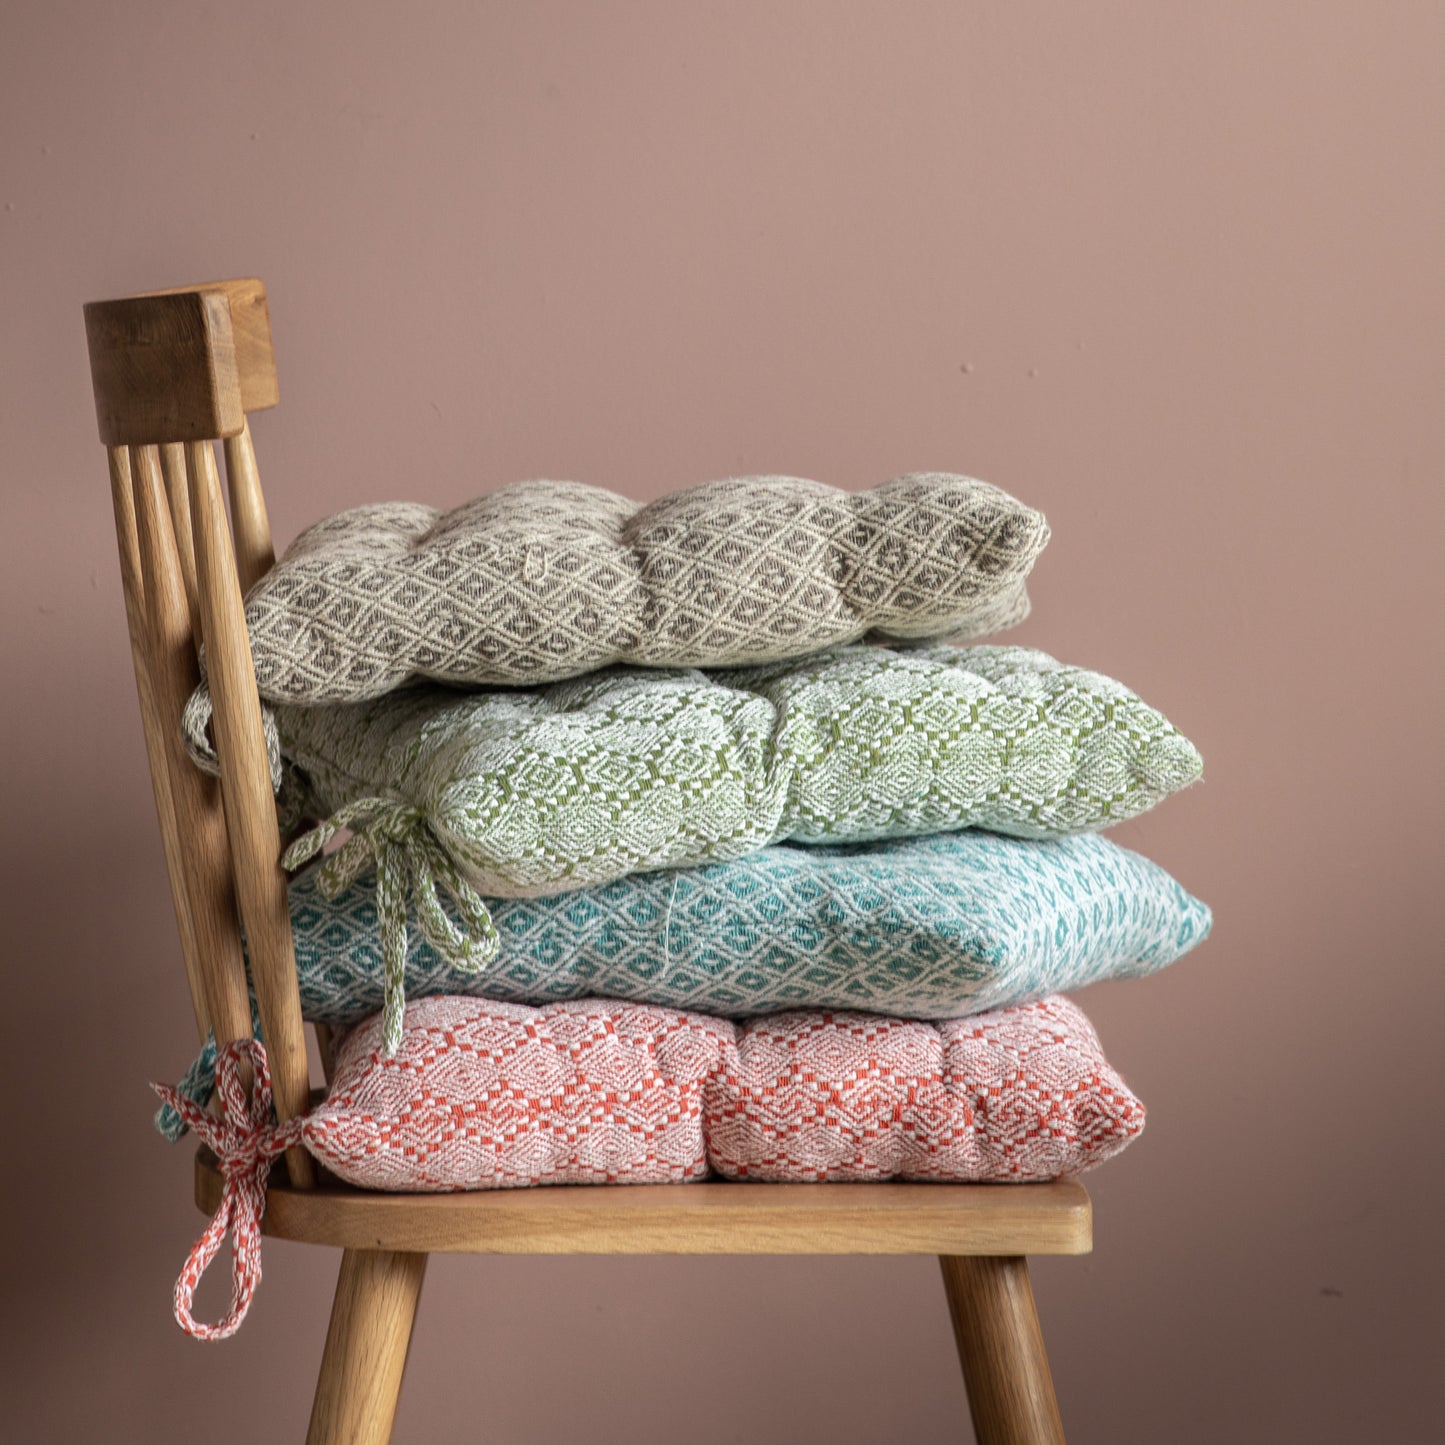 A stack of interior decor pillows on a wooden chair from Kikiathome.co.uk.